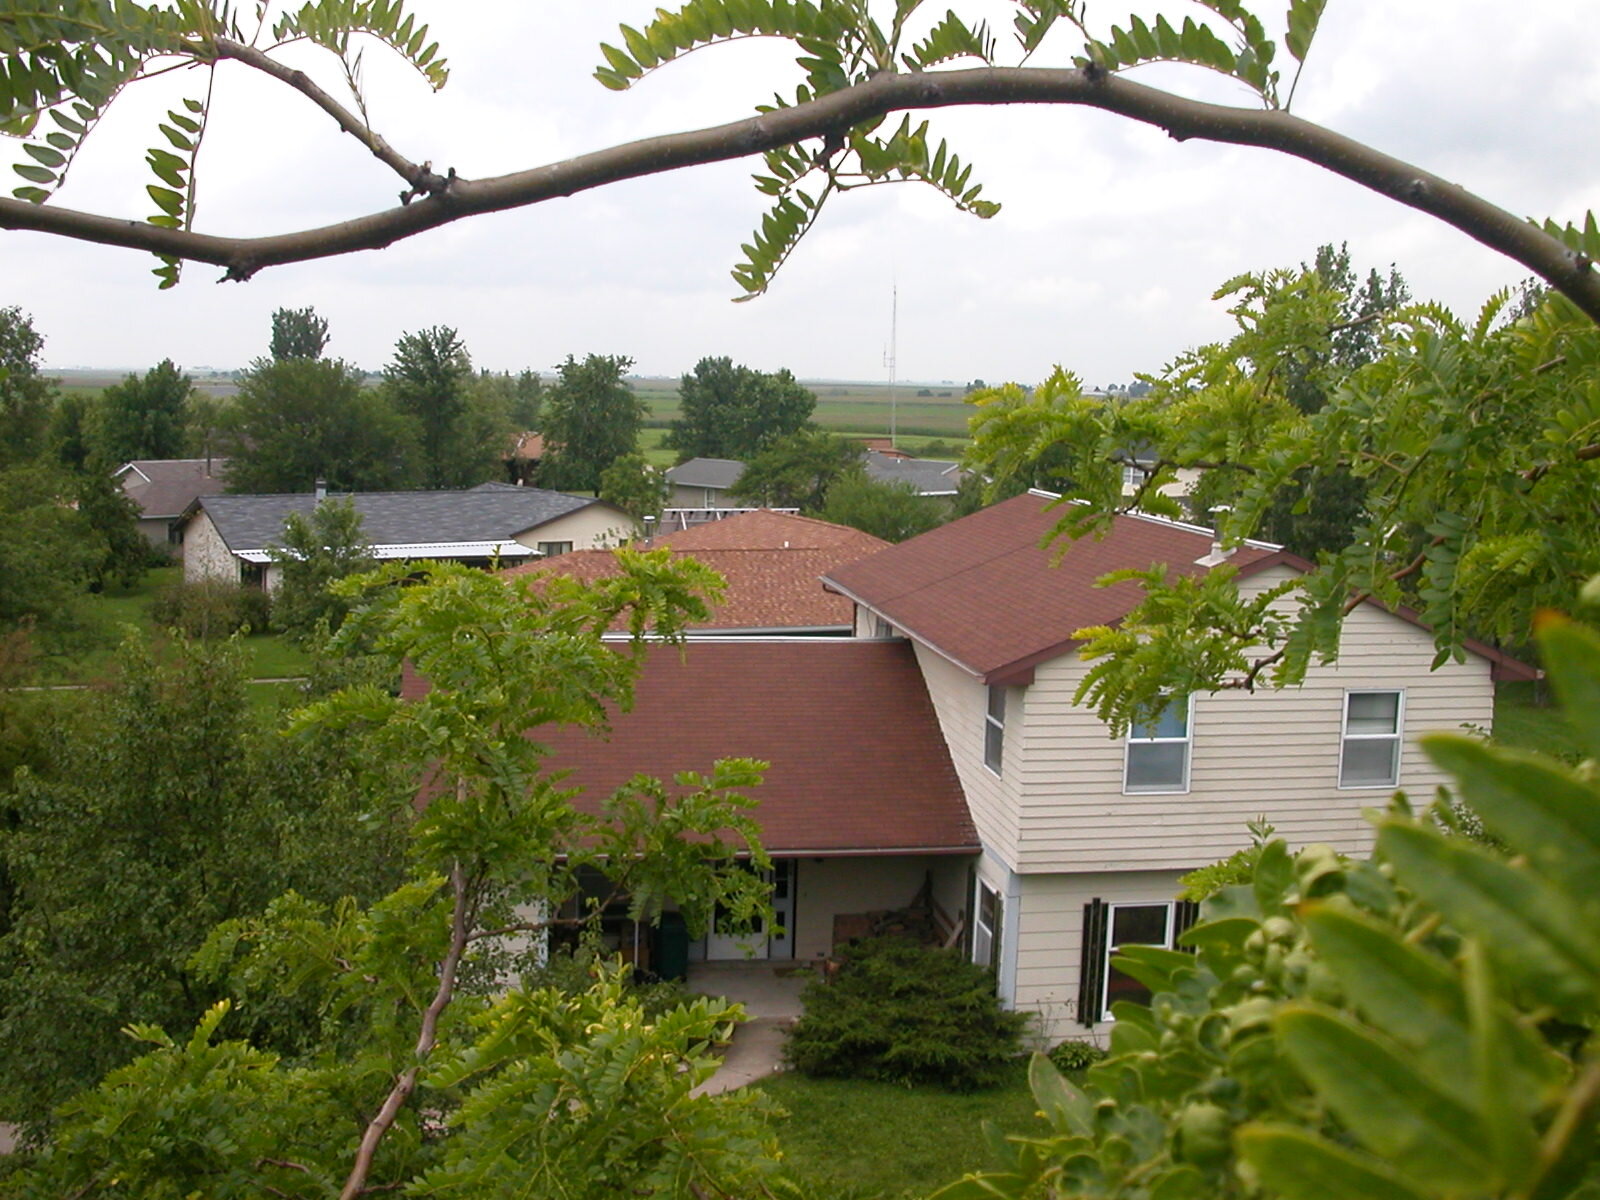 Squirrel's Eye View of Stelle Homes